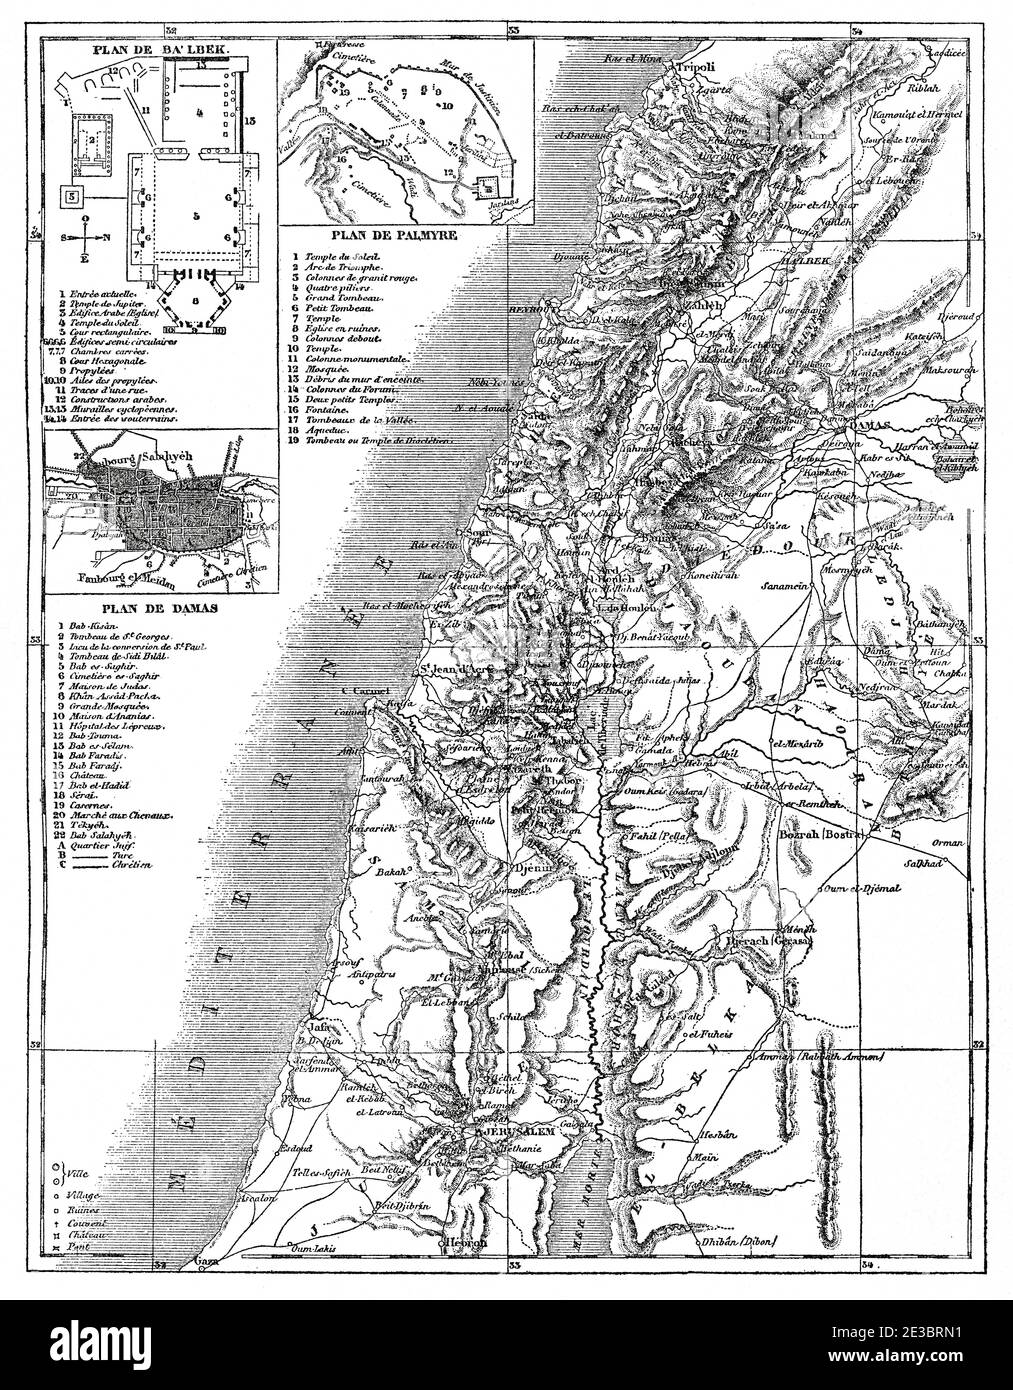 Old map of Syria, Syrian Arab Republic. Middle East, Old 19th century engraved illustration, Le Tour du Monde 1863 Stock Photo